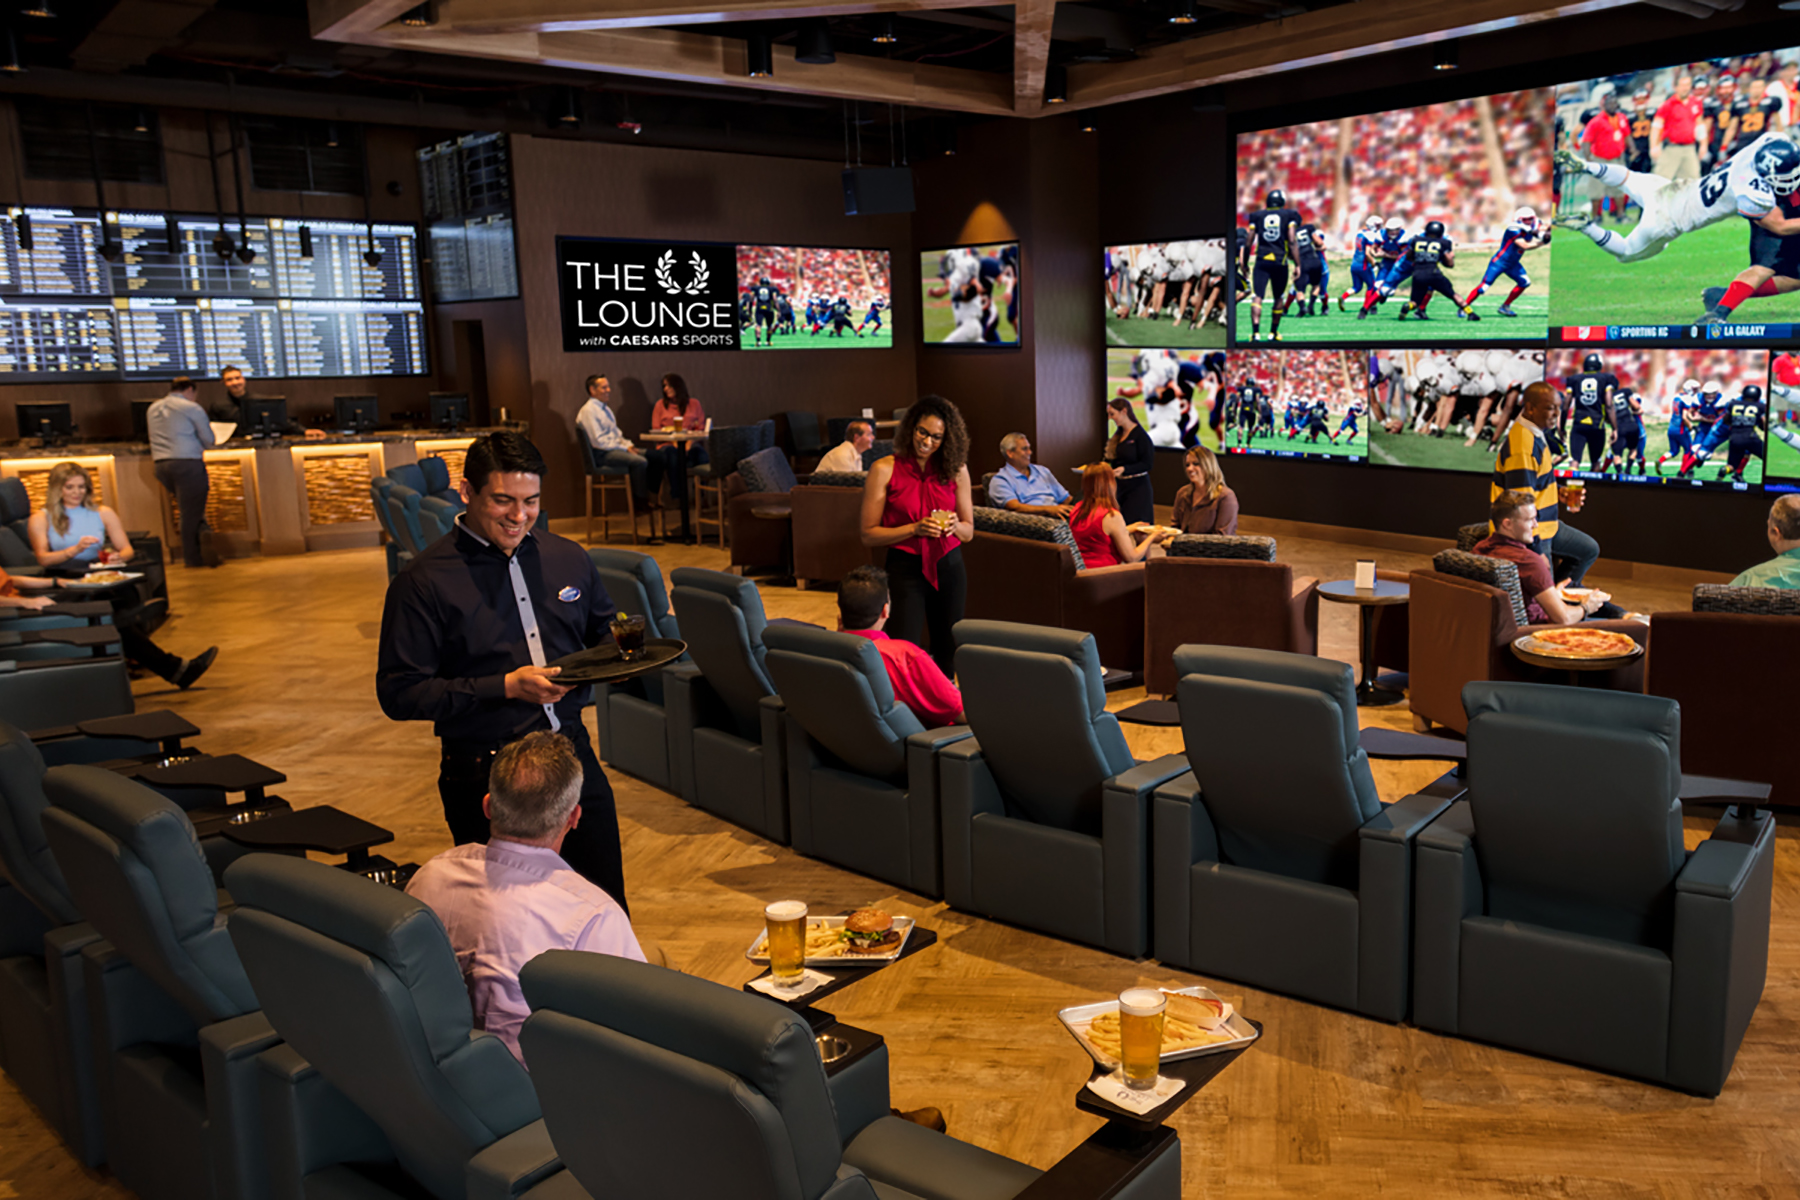 The Lounge with Caesars Sports at Point Place Casino